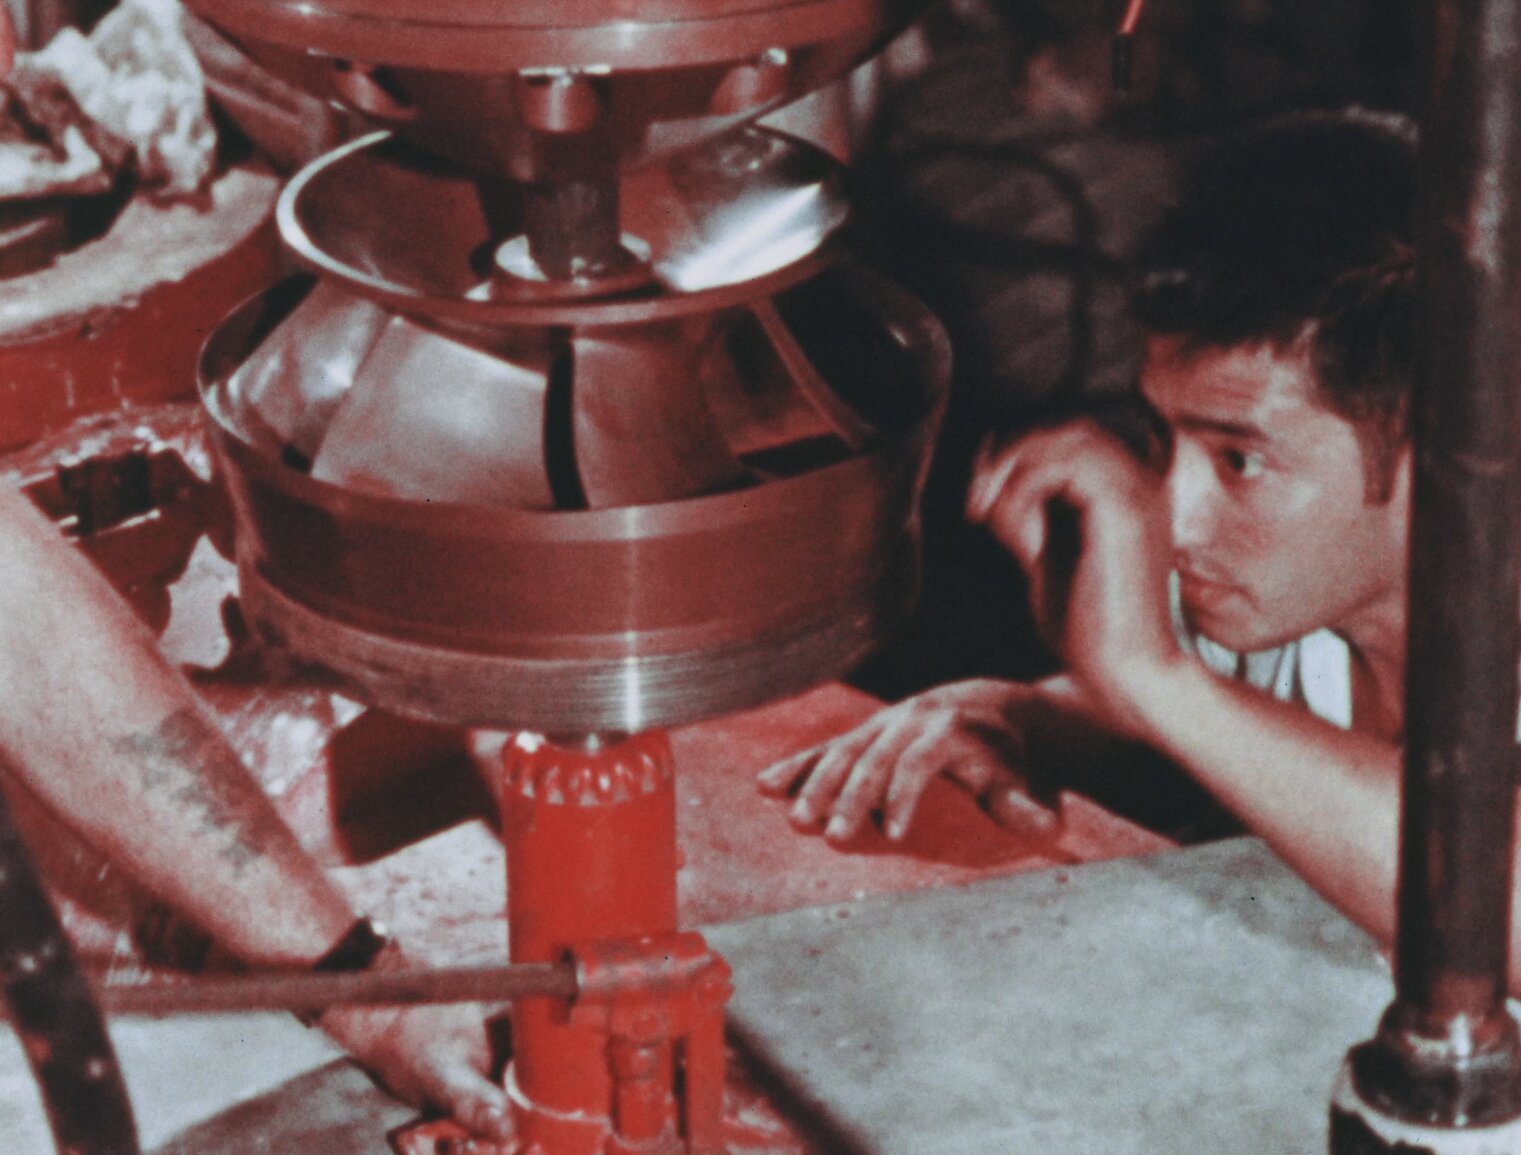 Man looks at broken nuclear recirculation pump while trying to fix it. It is jacked up on a red jack.